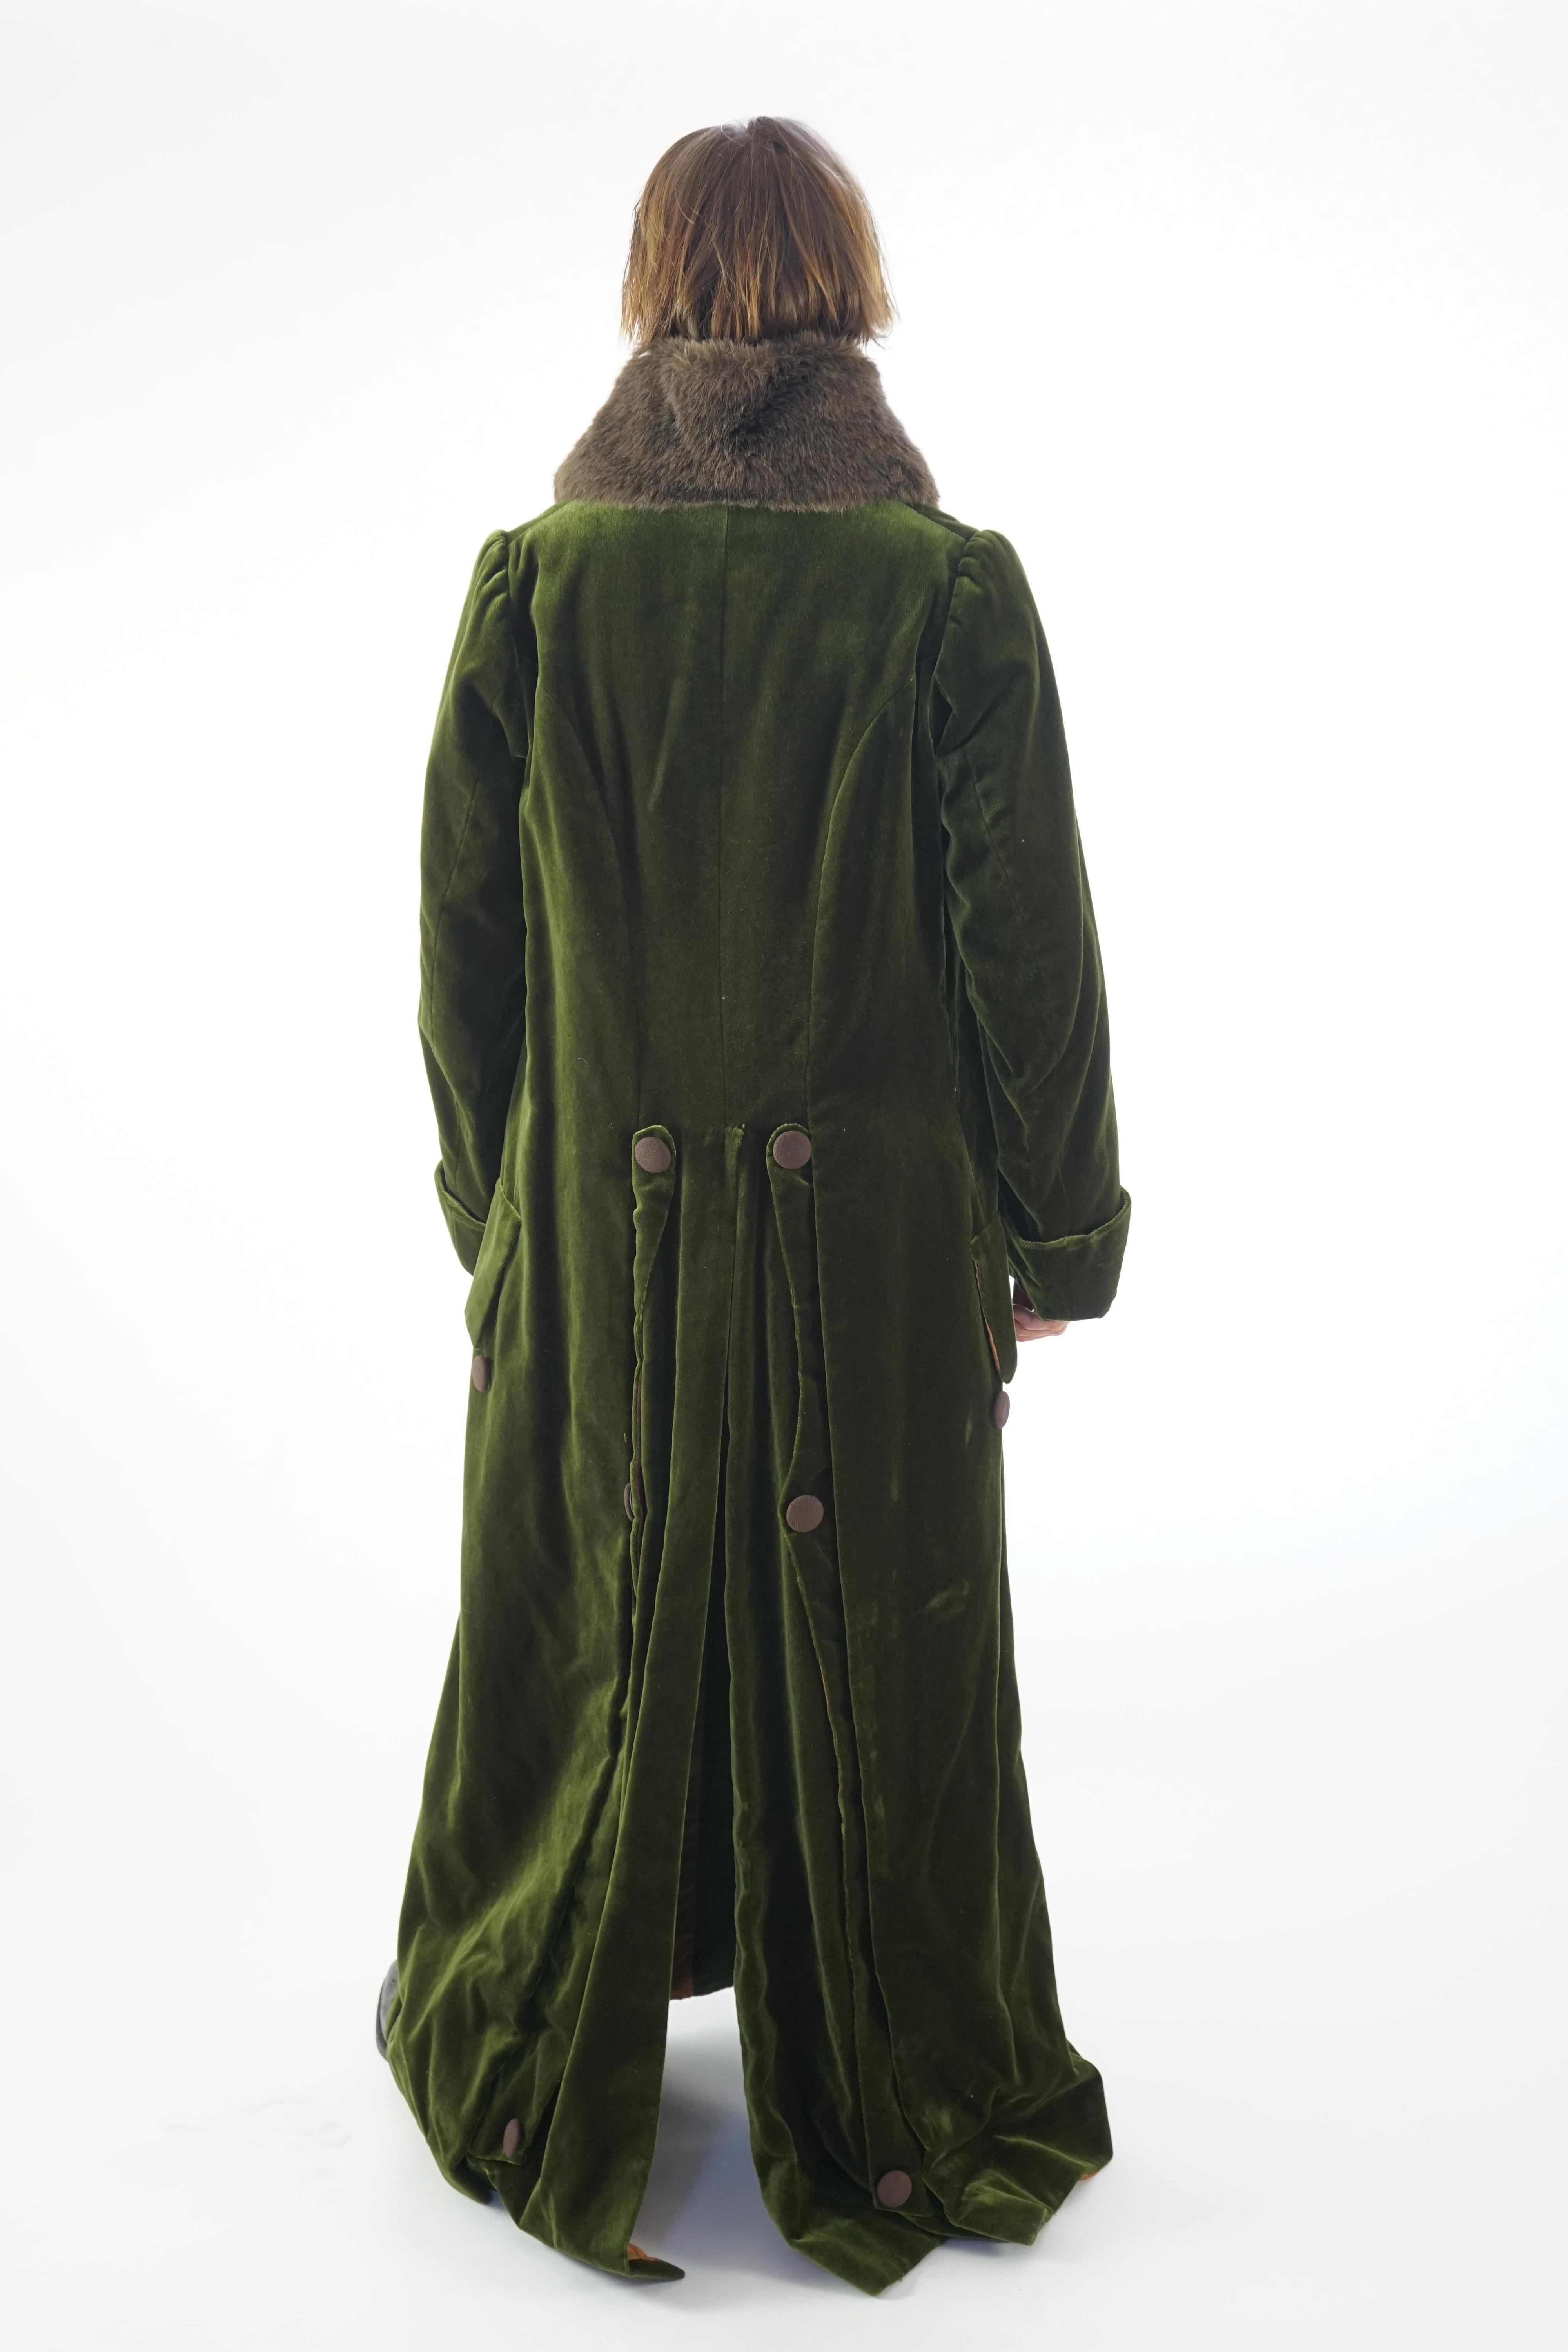 A gentleman's Regency style overcoat - bottle green with brown trim and fur (fake) collar. Ex Carl Rosa Opera Company 'Don Giovanni' and 'The Merry Widow'